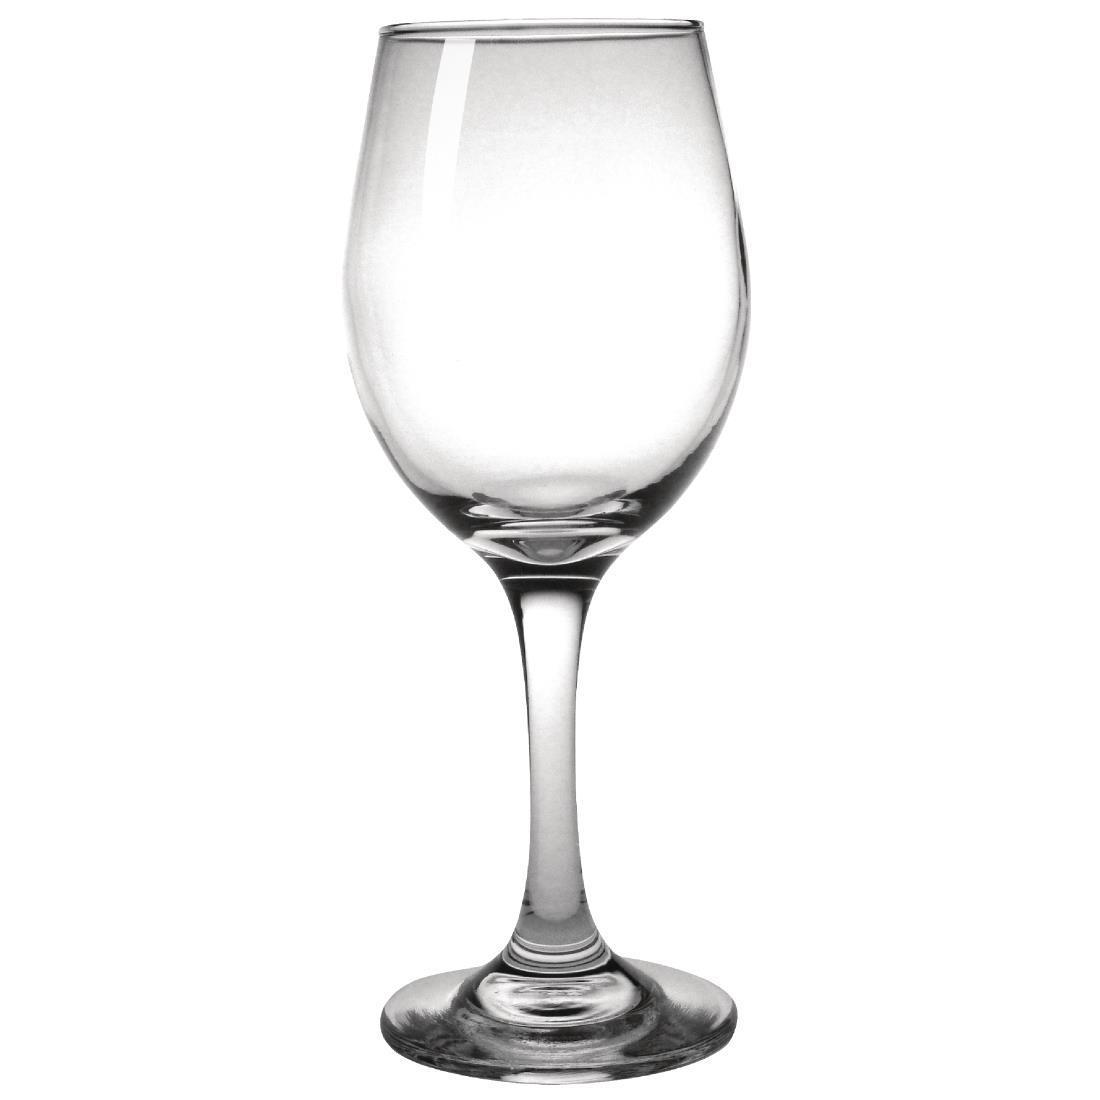 Olympia Solar Wine Glasses 310ml (Pack of 96) - GD325  - 1